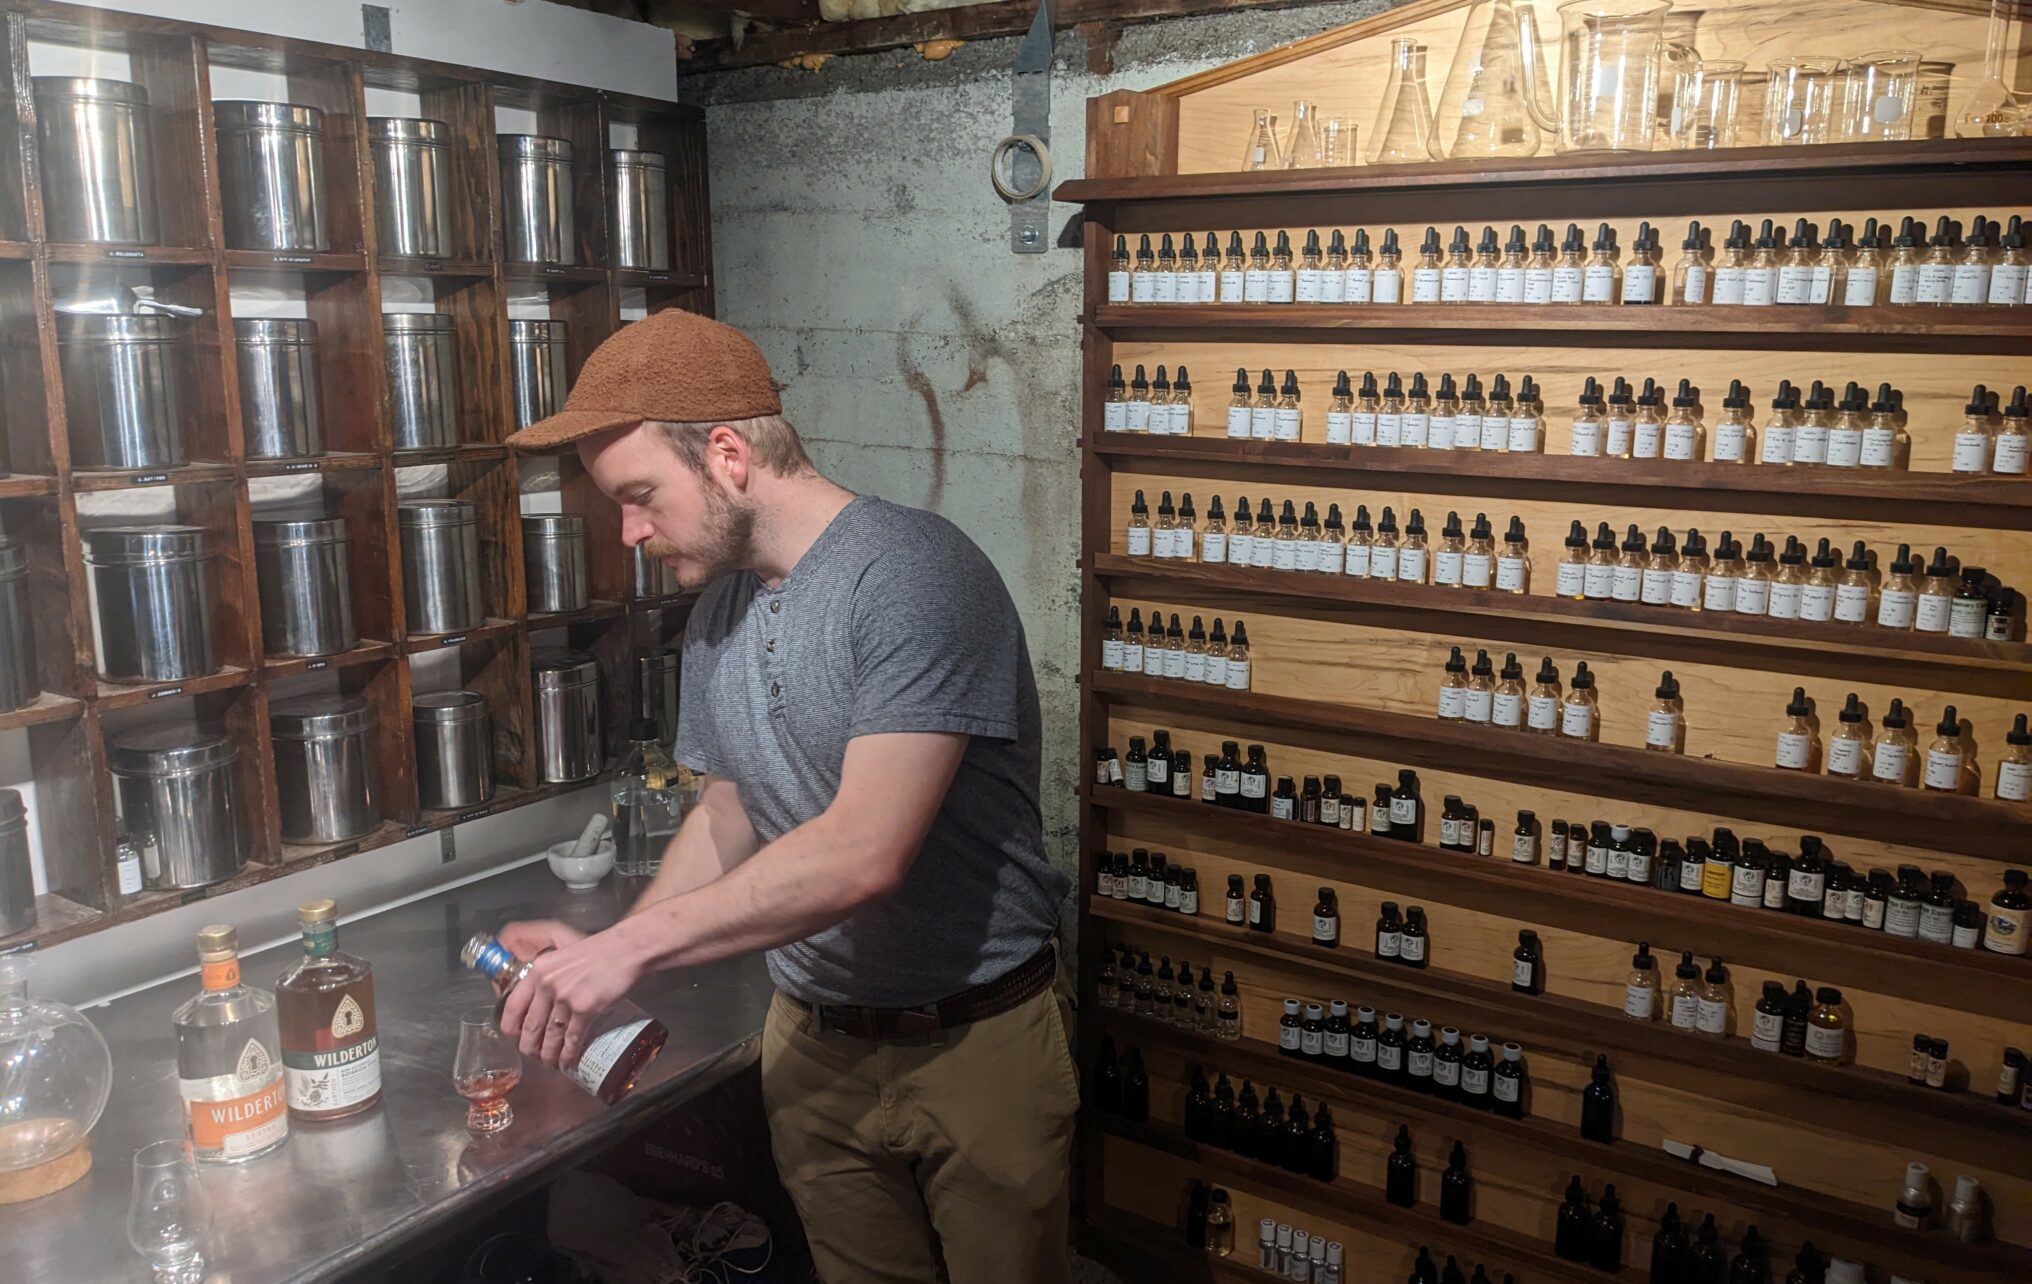 A man in a skully cap stands near a wooden wall of small shelves filled with herbs and spices. He pours non-alcoholic spirits into a clear glass.